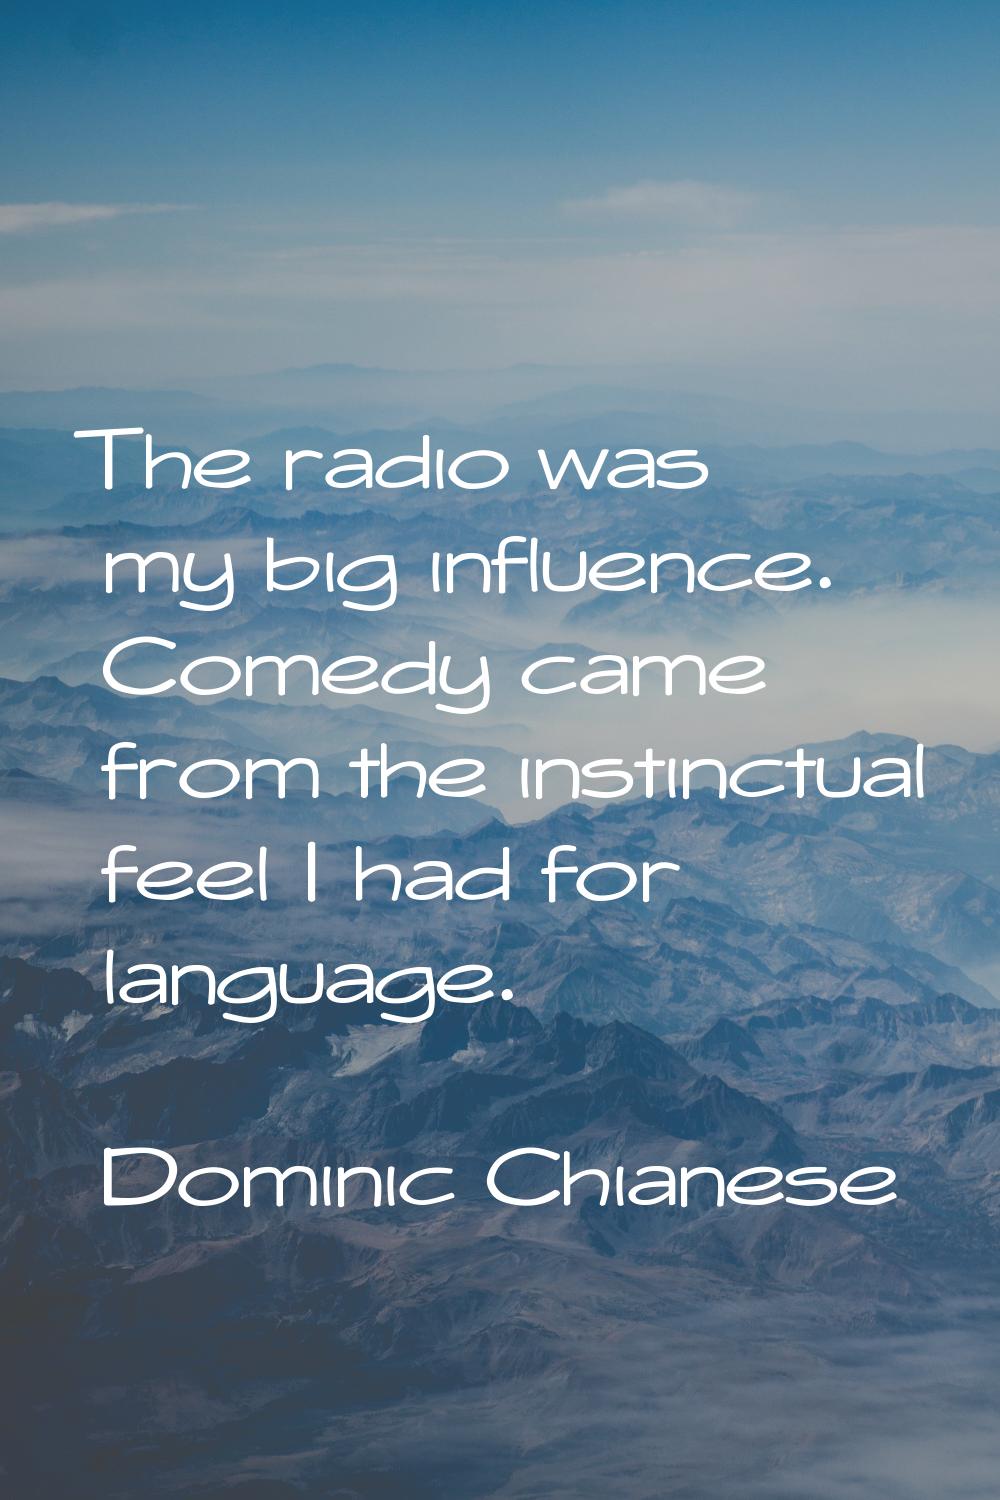 The radio was my big influence. Comedy came from the instinctual feel I had for language.